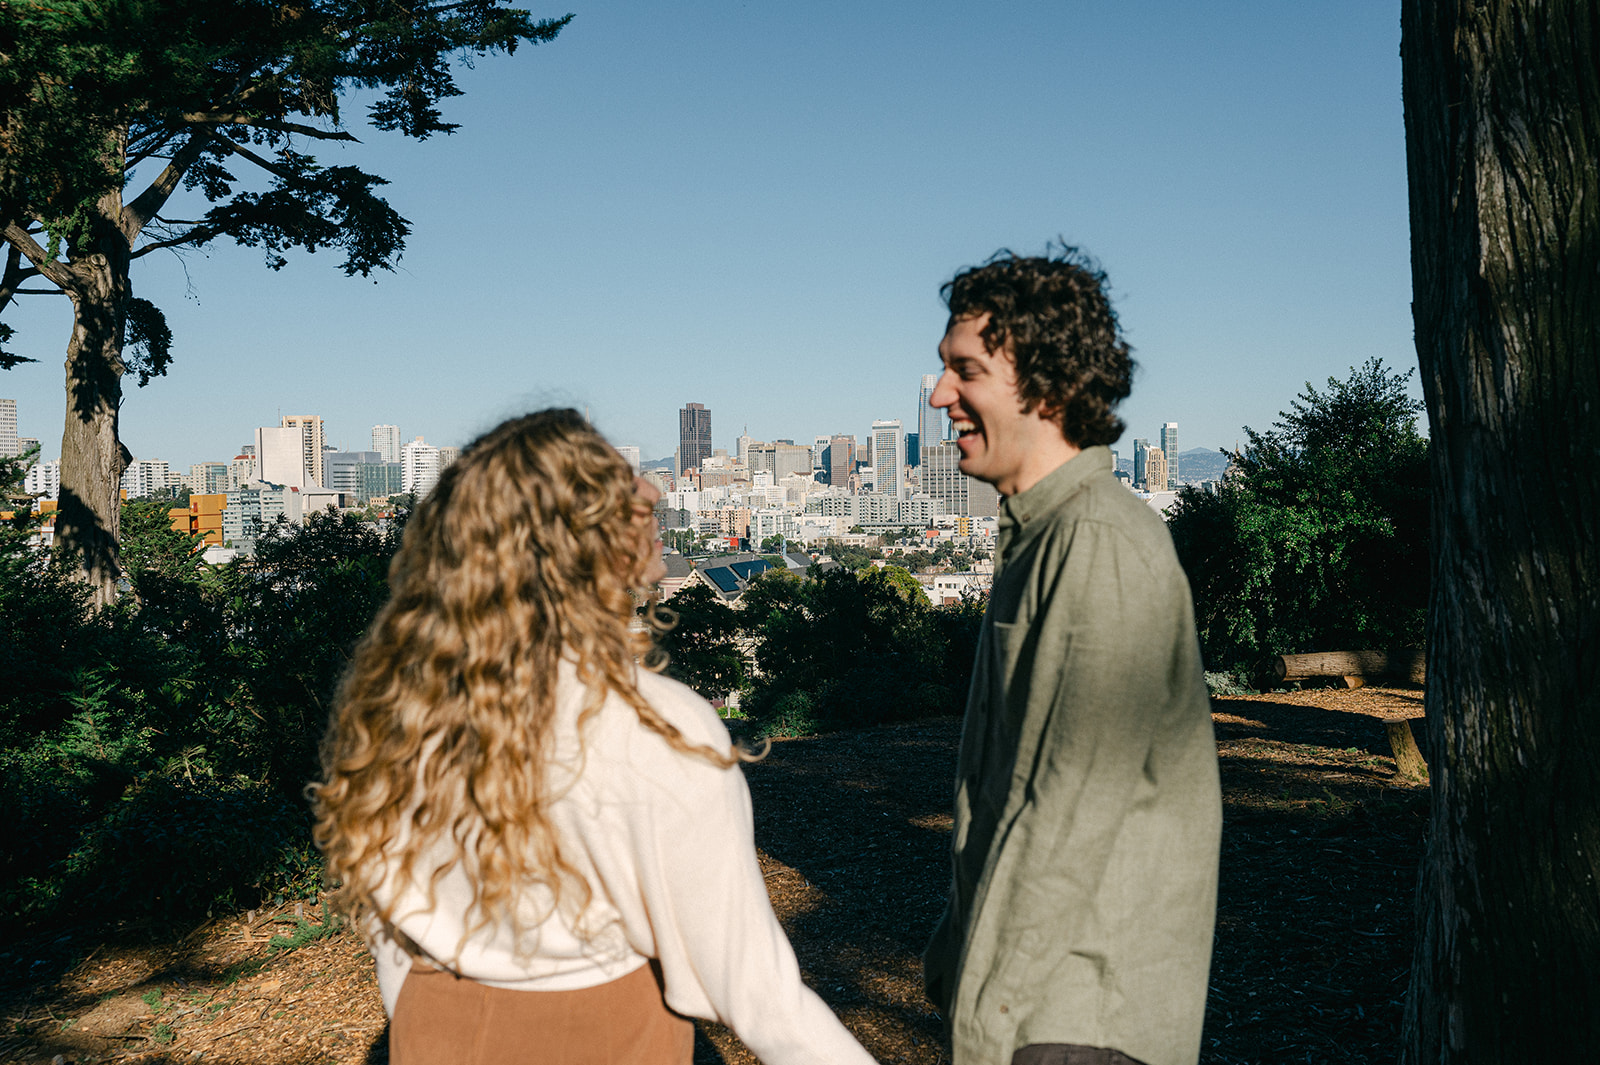 Candid engagement photo at Alamo Square Park in San Francisco with the skyline in the distance.